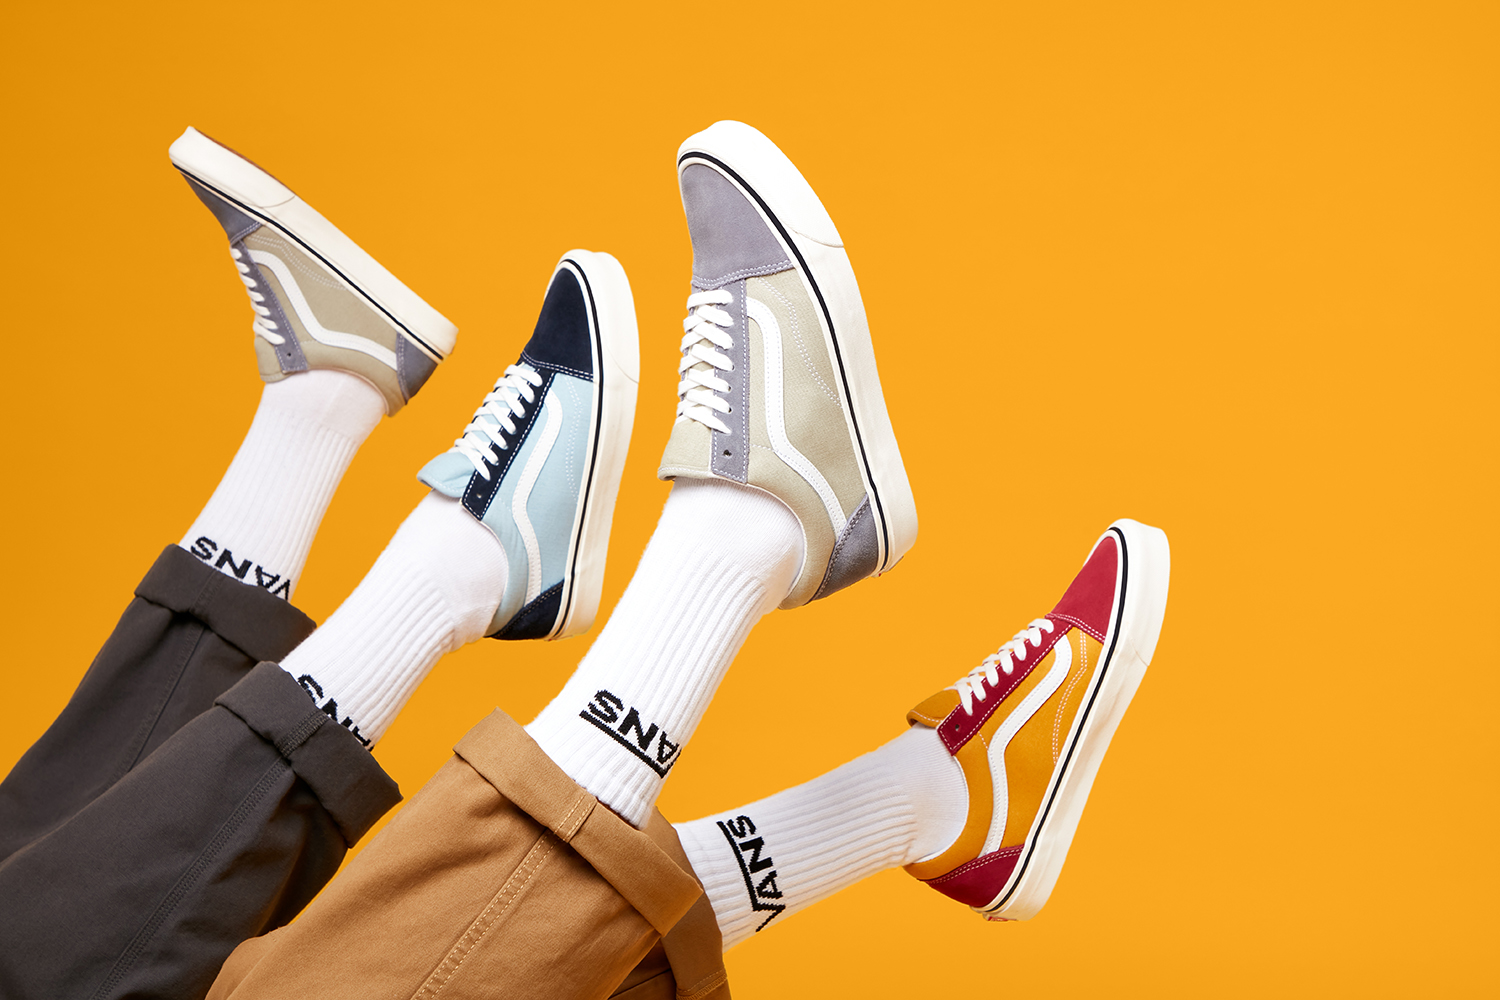 Shoe models wearing van shoes, captured by I Heart Studios for eCommerce model fashion photography.